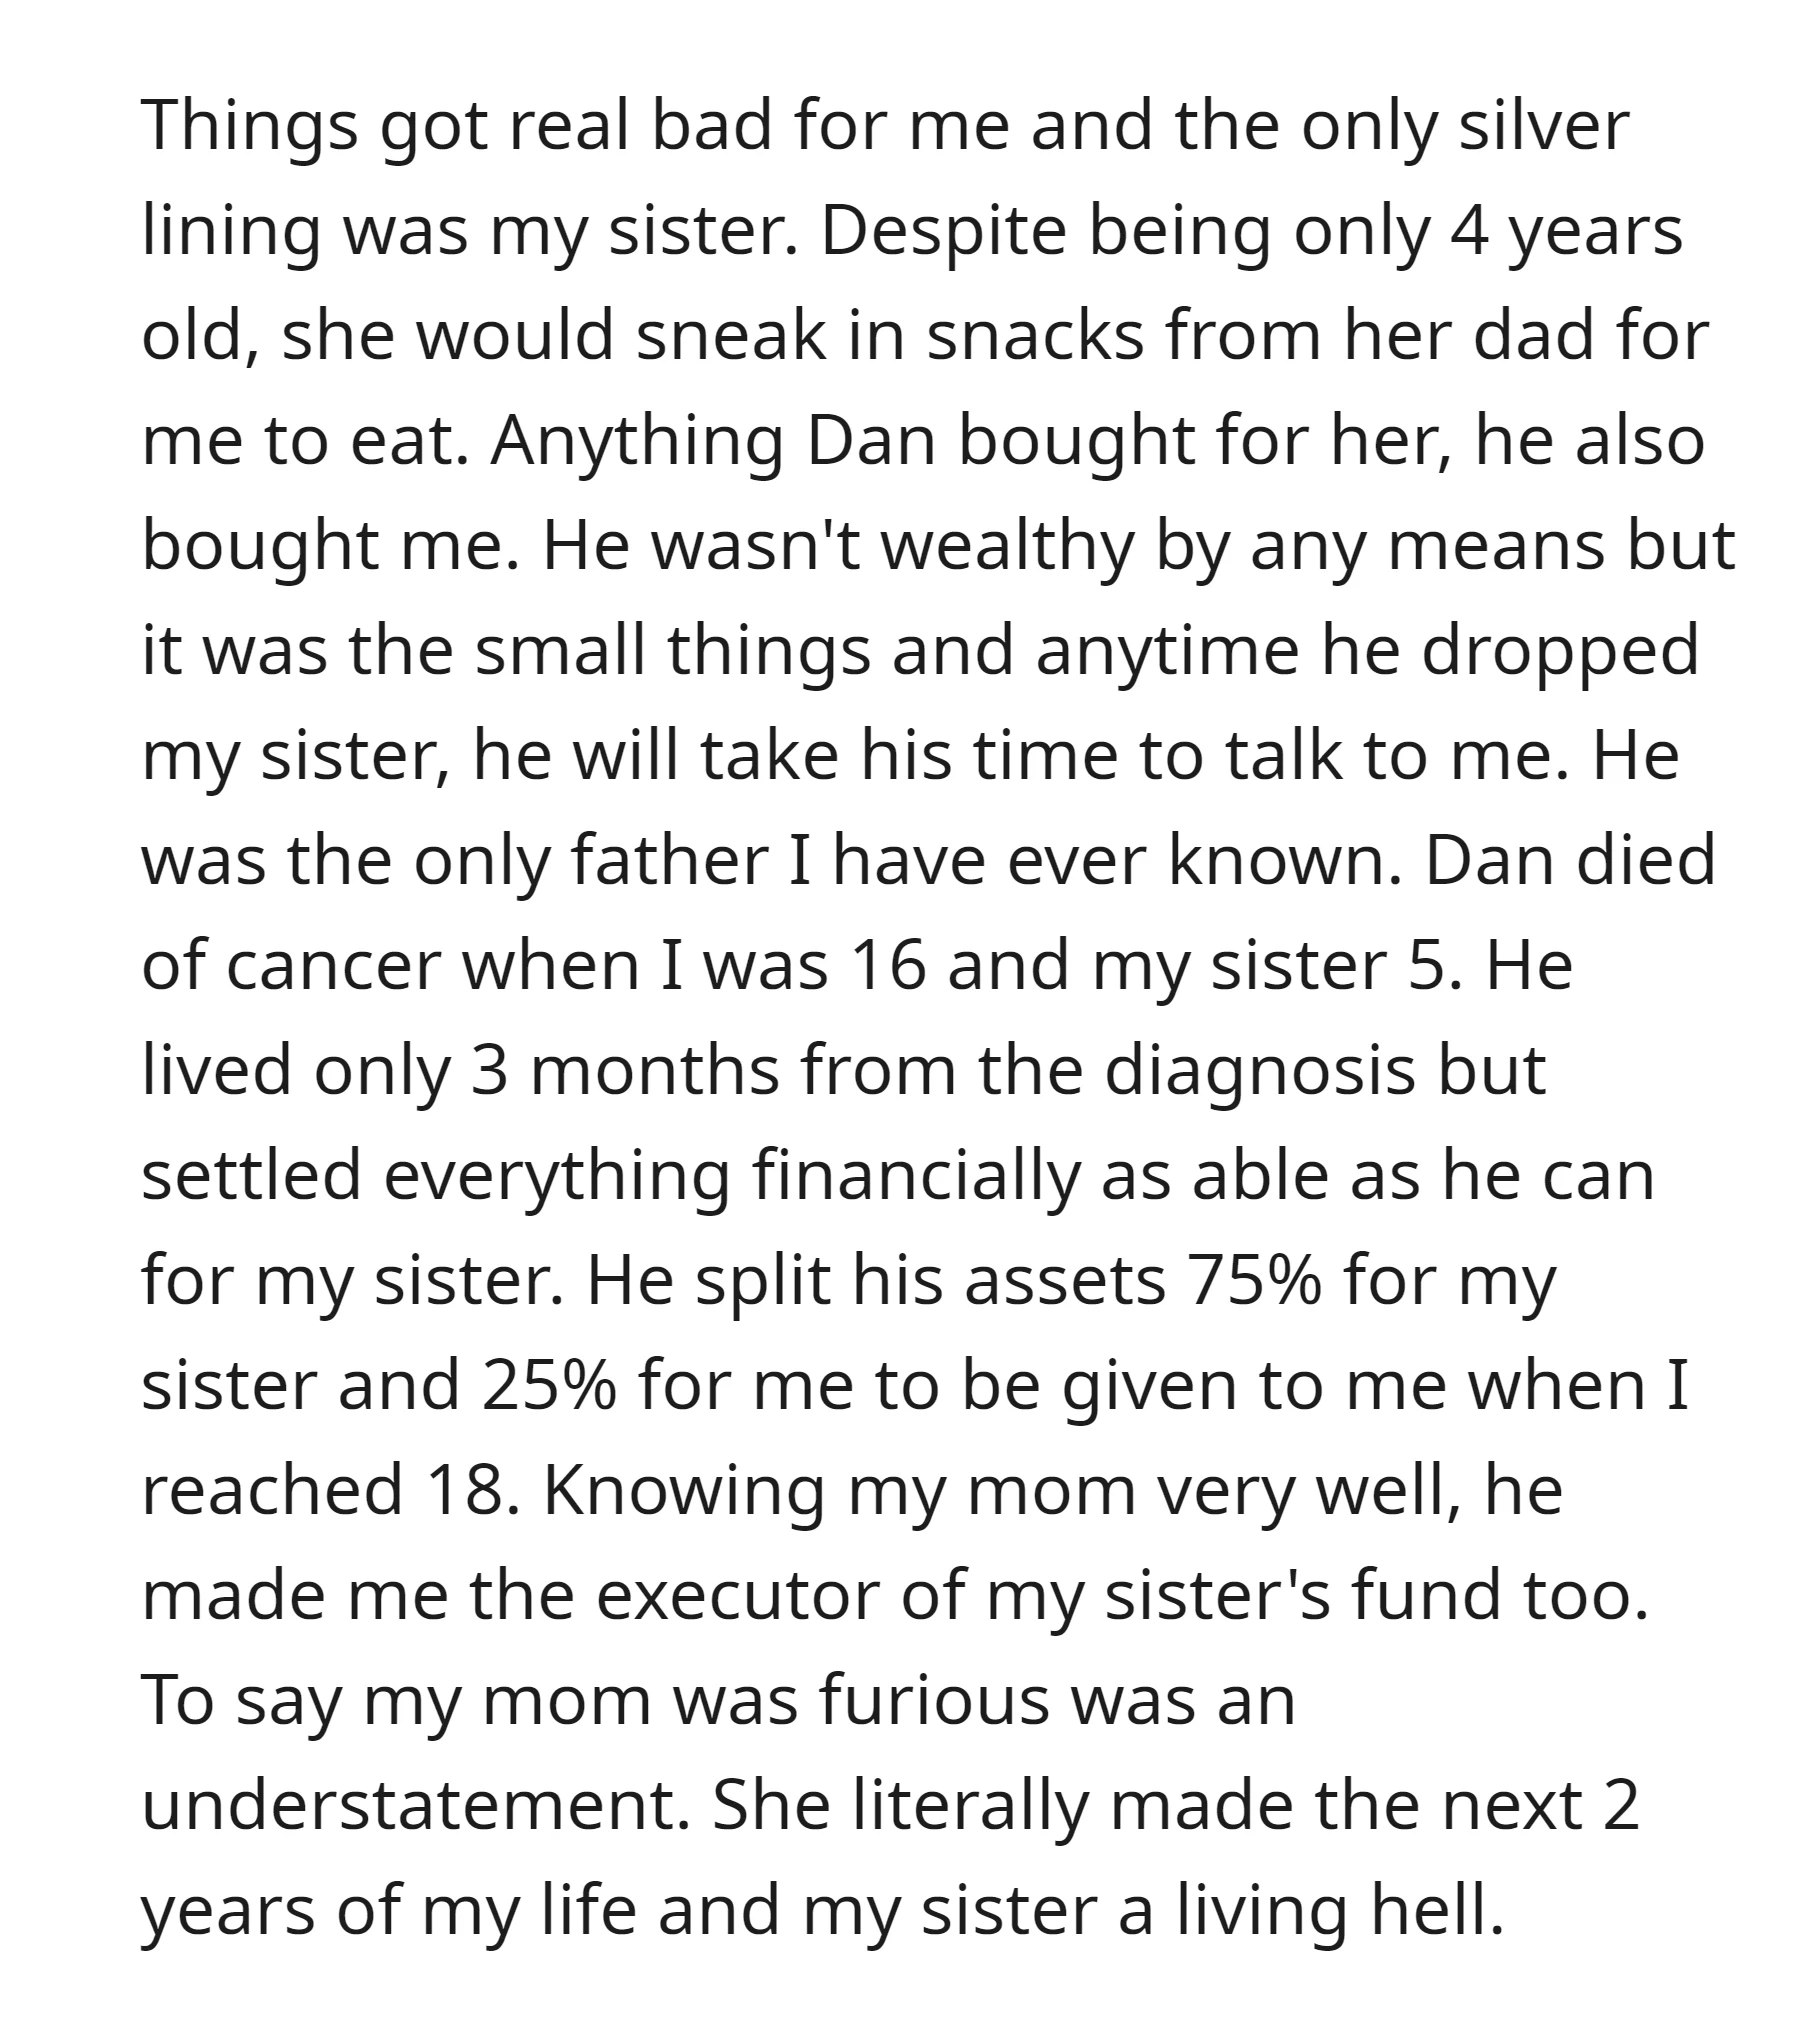 After her mom's boyfriend passed away, he left significant assets for the OP and her sister